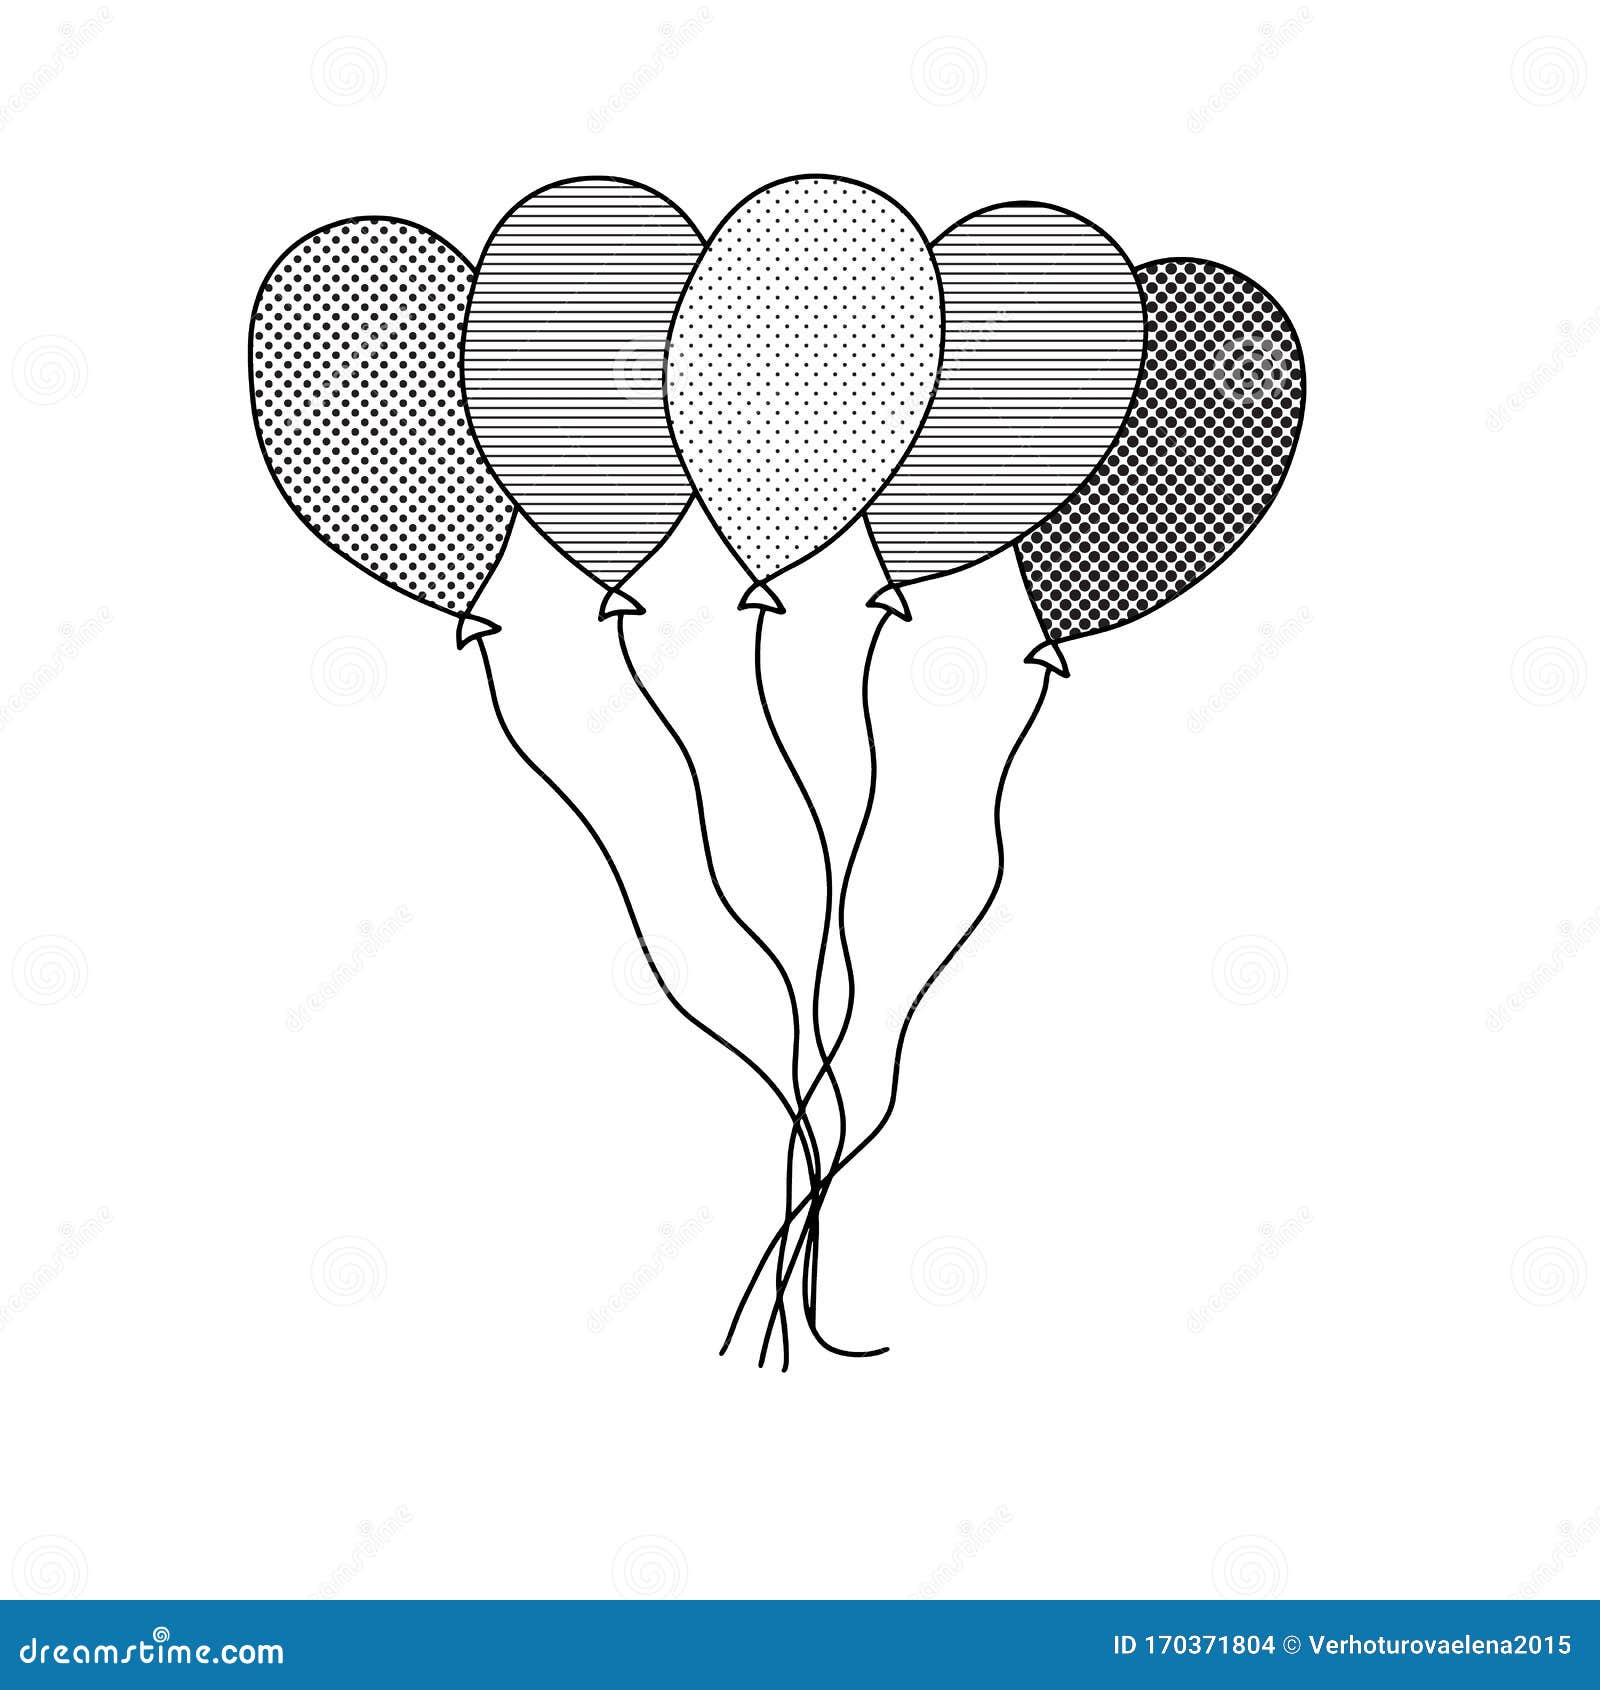 A simple sketch of the balloons Royalty Free Vector Image